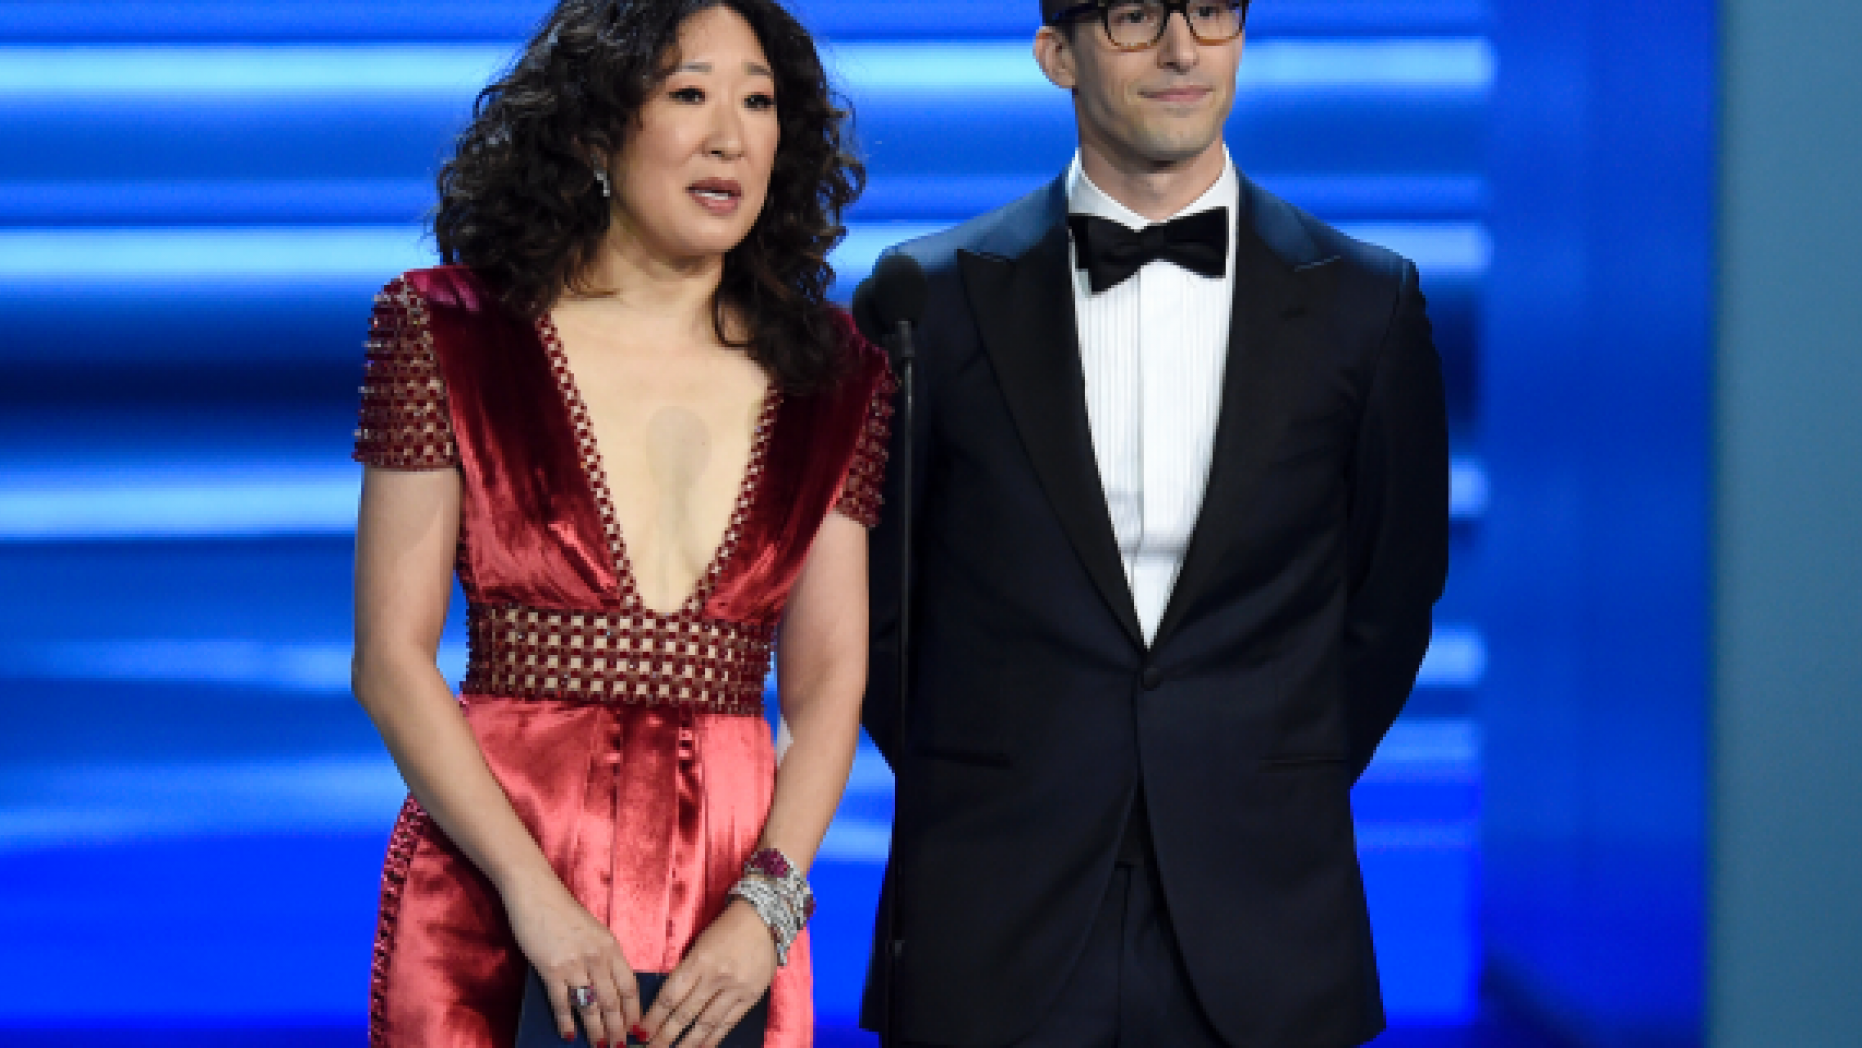 Sandra Oh, left, and Andy Samberg present an award at the 70th Primetime Emmy Awards in Los Angeles. Oh and Samberg will share host duties at next month’s Golden Globe ceremony. 